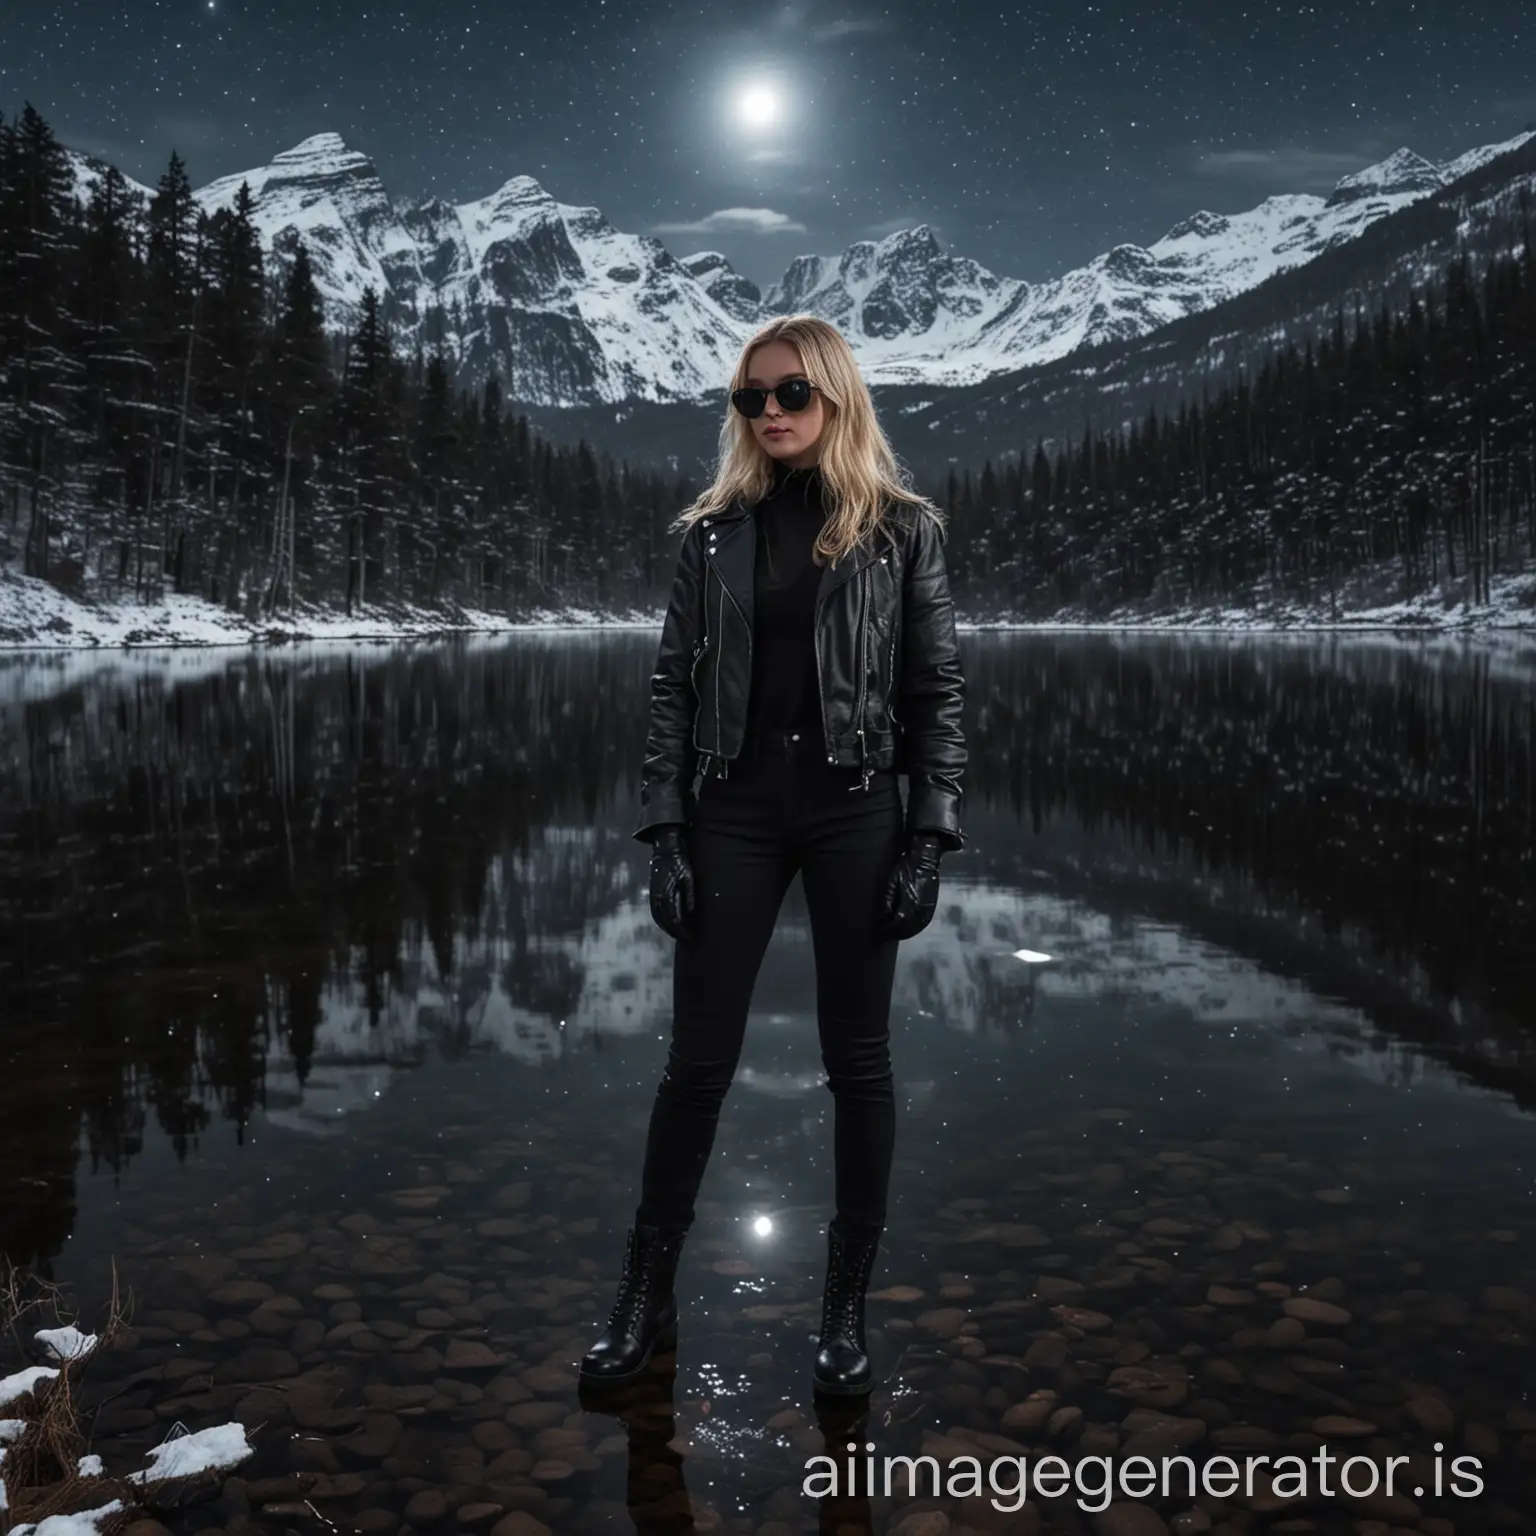 Blonde-Woman-Standing-by-Lake-in-Dark-Forest-at-Night